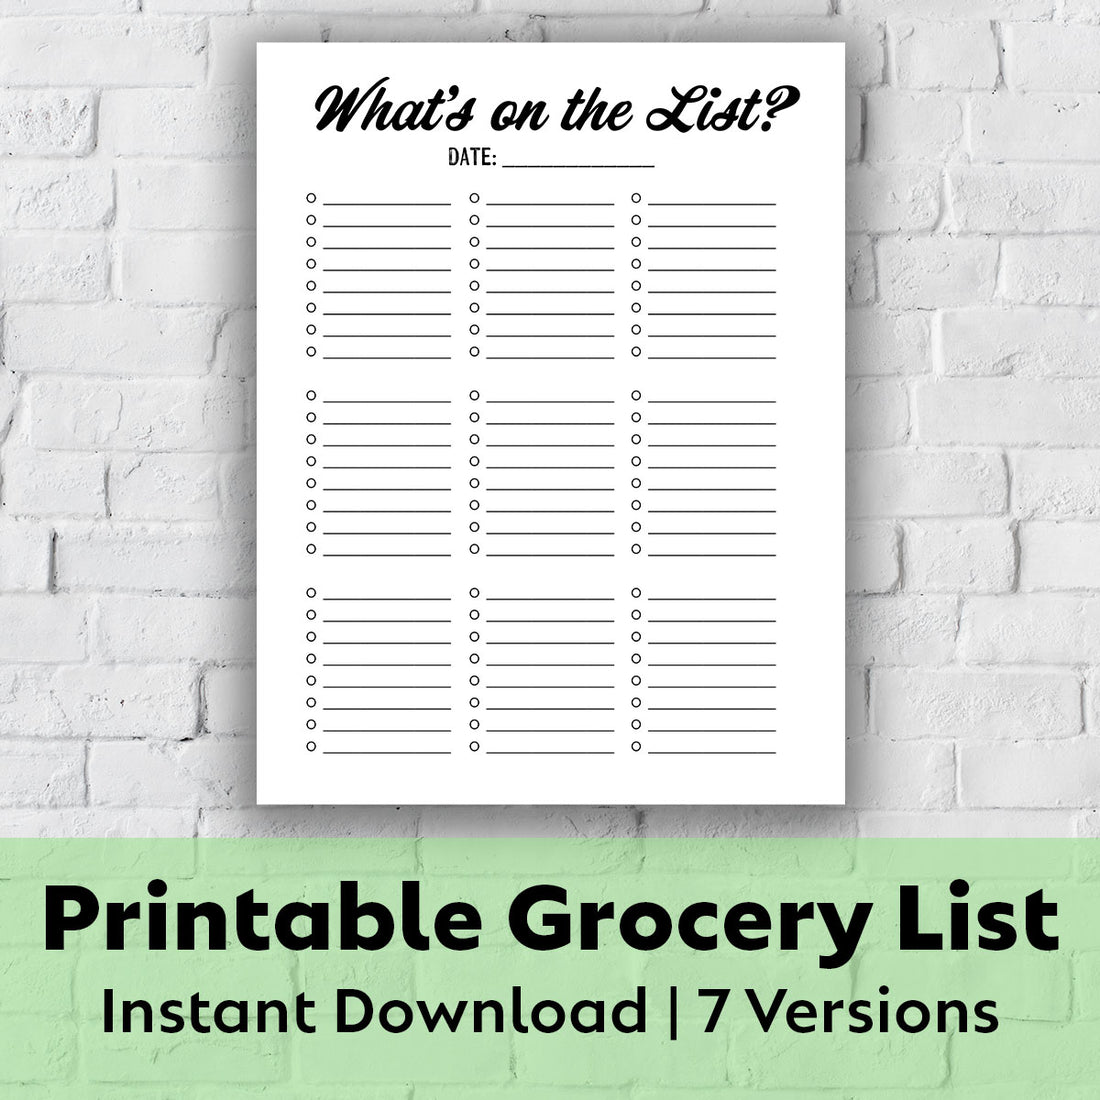 Printable Grocery List - What&